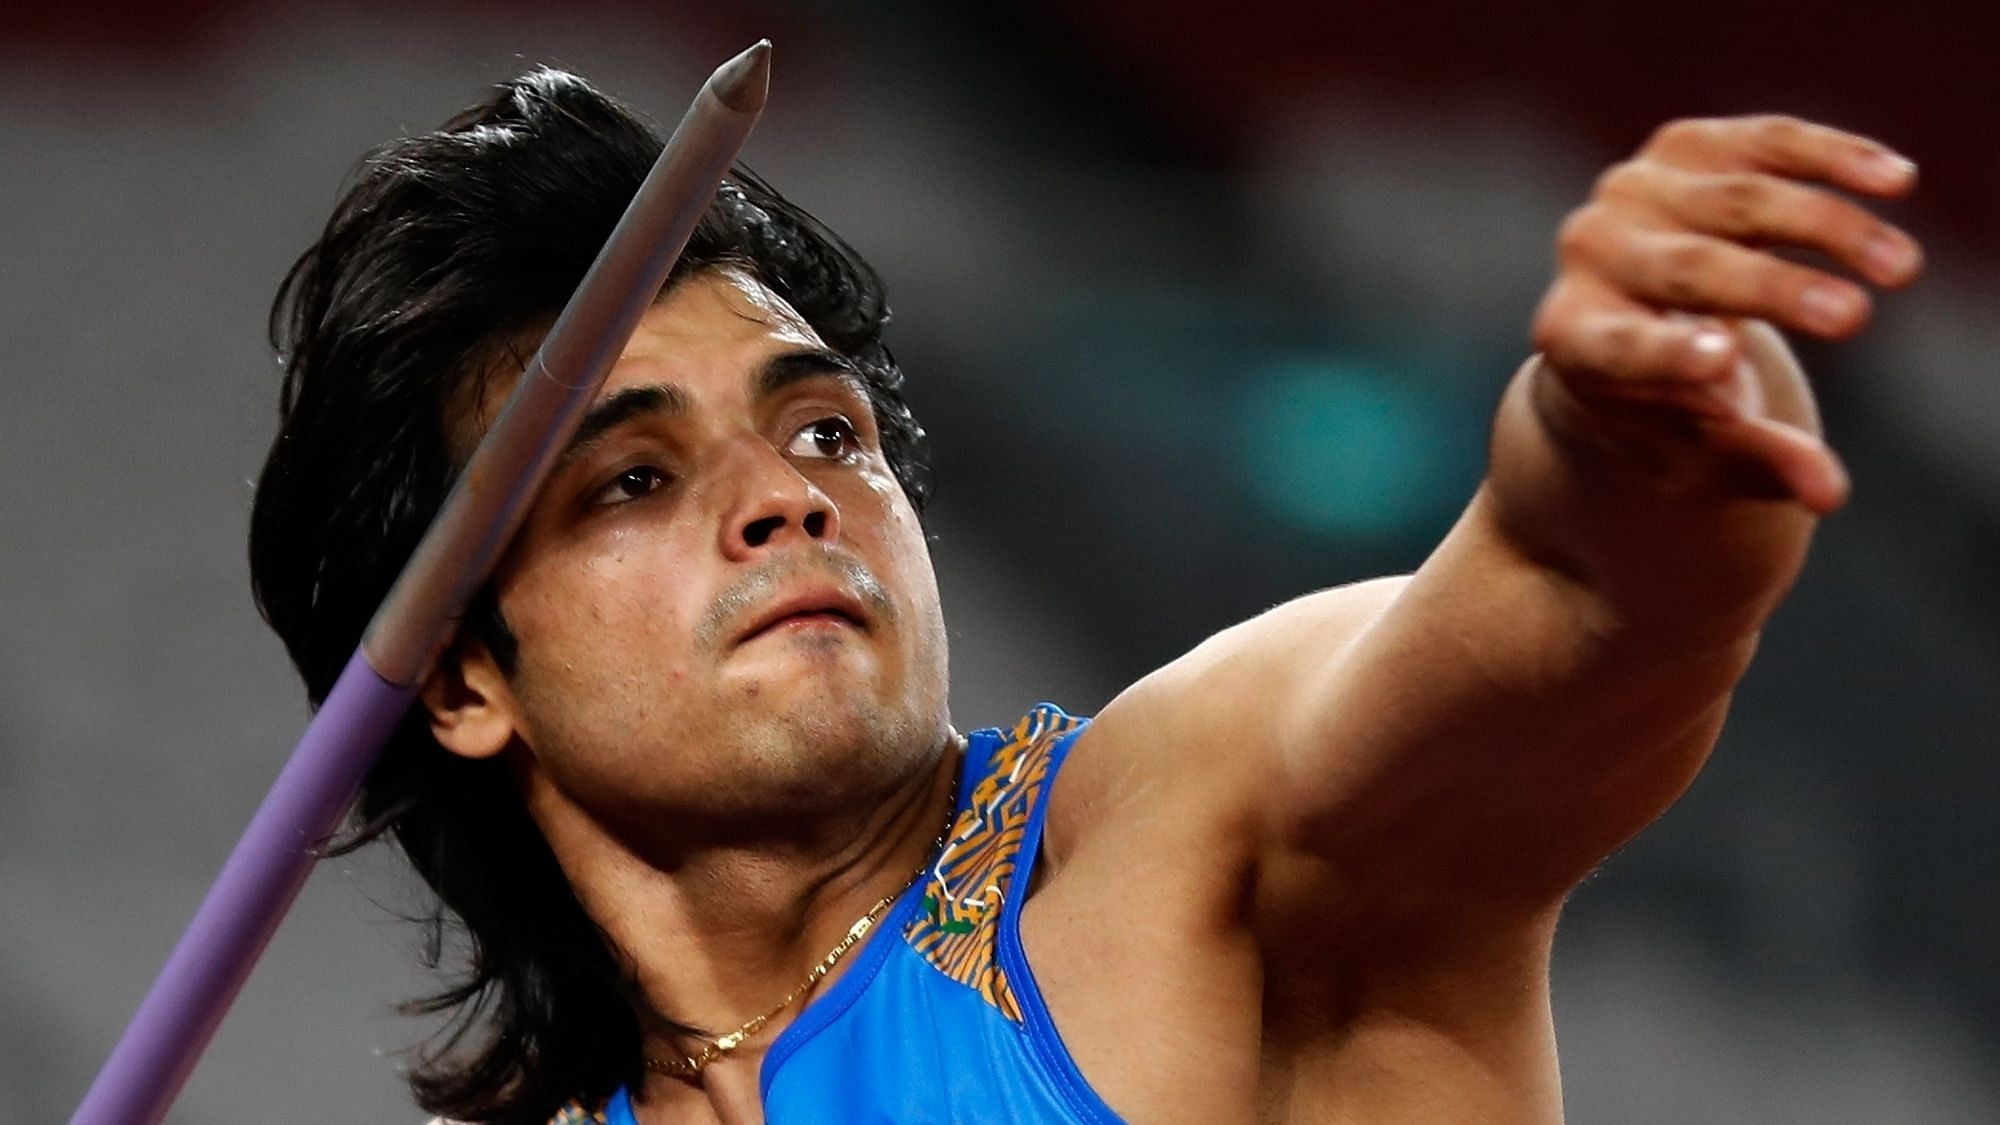 Neeraj Chopra donated Rs 2 lakh to the PM CARES fund and Rs 1 lakh to the Haryana COVID-19 Relief Fund.